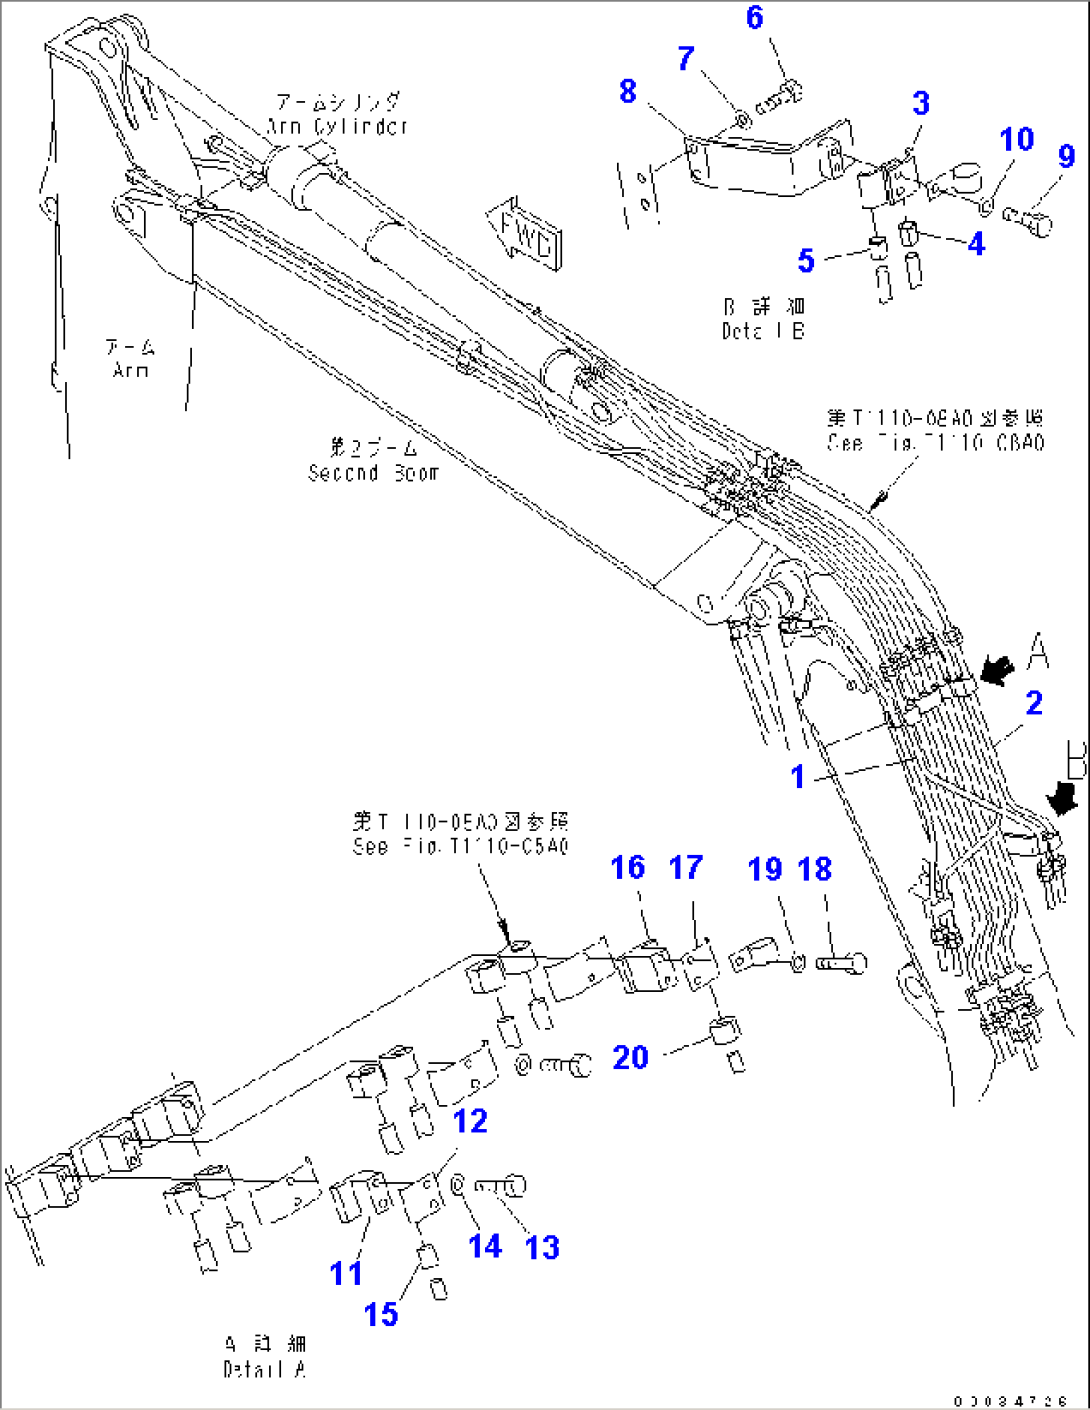 2-PIECE BOOM (CLAMP) (1ST BOOM) (FOR ROTARY ARM)